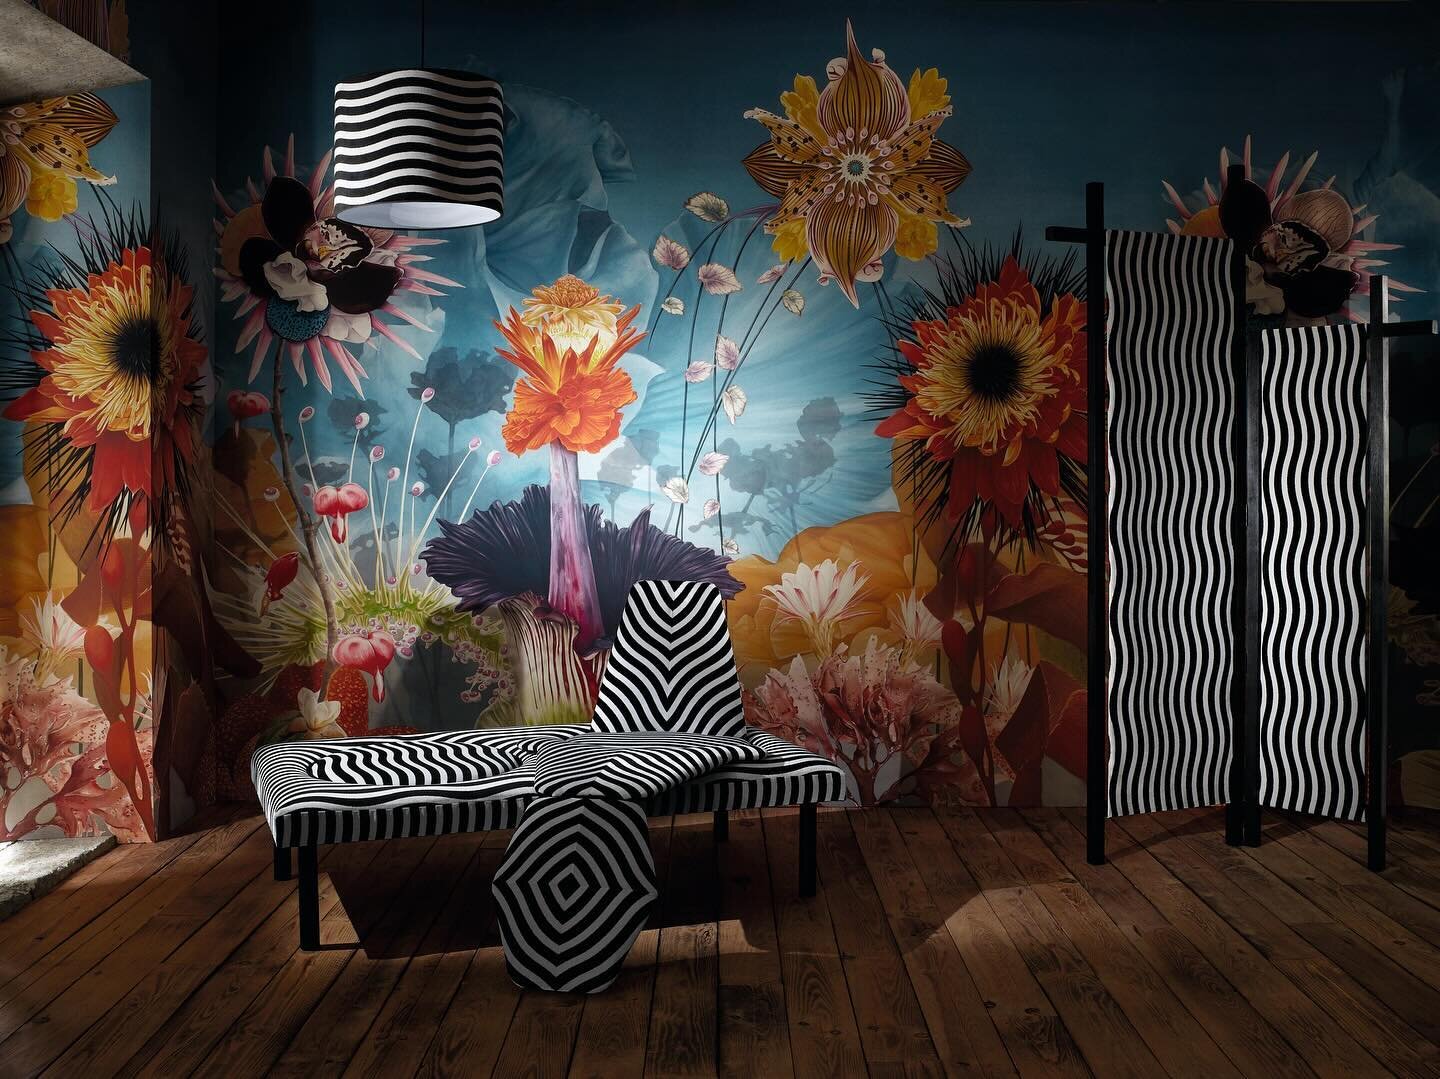 P&Ecirc;LE-M&Ecirc;LE FABRIC &amp; WALLPAPER
Sophisticated fabrics and wallcoverings rich in texture and adornment

A sophisticated collection of decorative fabrics and wallcoverings by Christian Lacroix Maison - &lsquo;P&ecirc;le-M&ecirc;le&rsquo; w